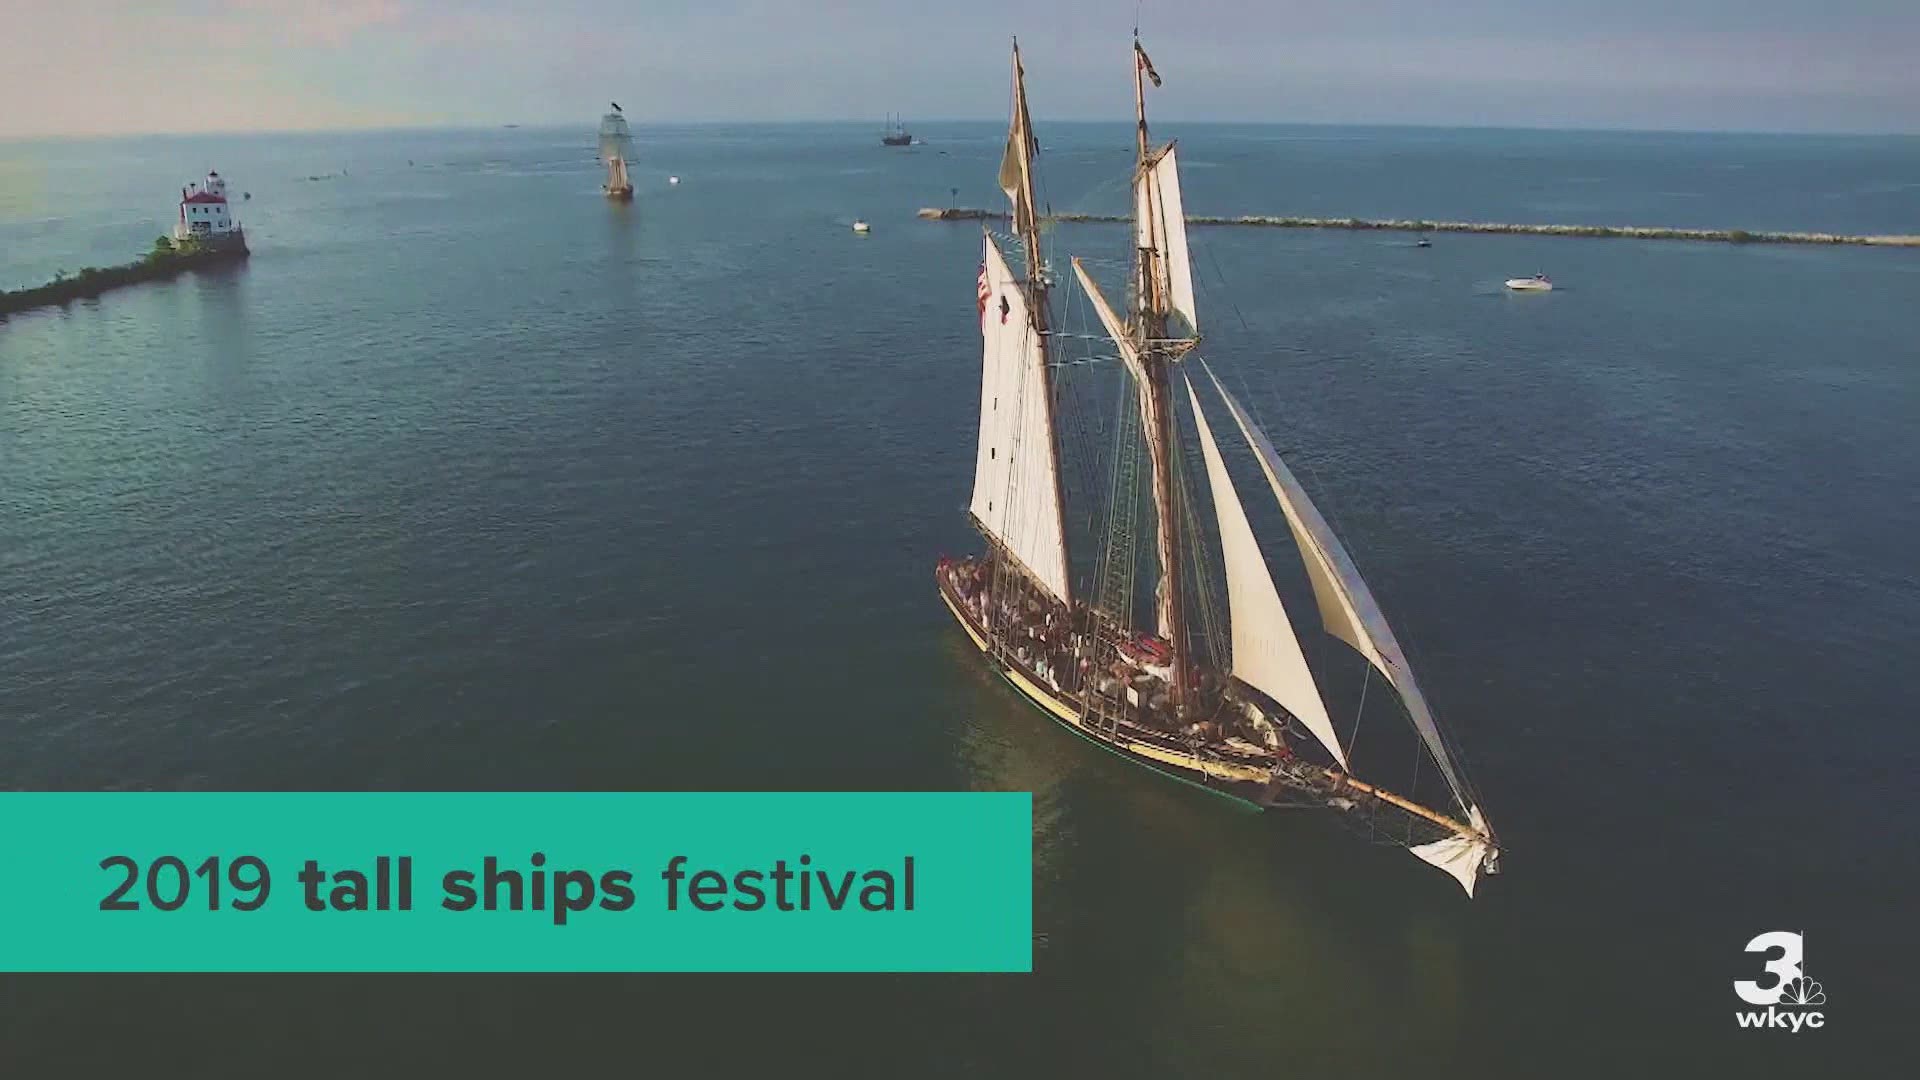 July 2019: Are you ready to set sail? The tall ships are back in Cleveland for a few days this summer -- and the aquatic event hits the water just days after the 2019 MLB All-Star Game wraps up. It's a four-day festival that runs Thursday, July 11 through Sunday, July 14 on Lake Erie near FirstEnergy Stadium -- and WKYC will be there.